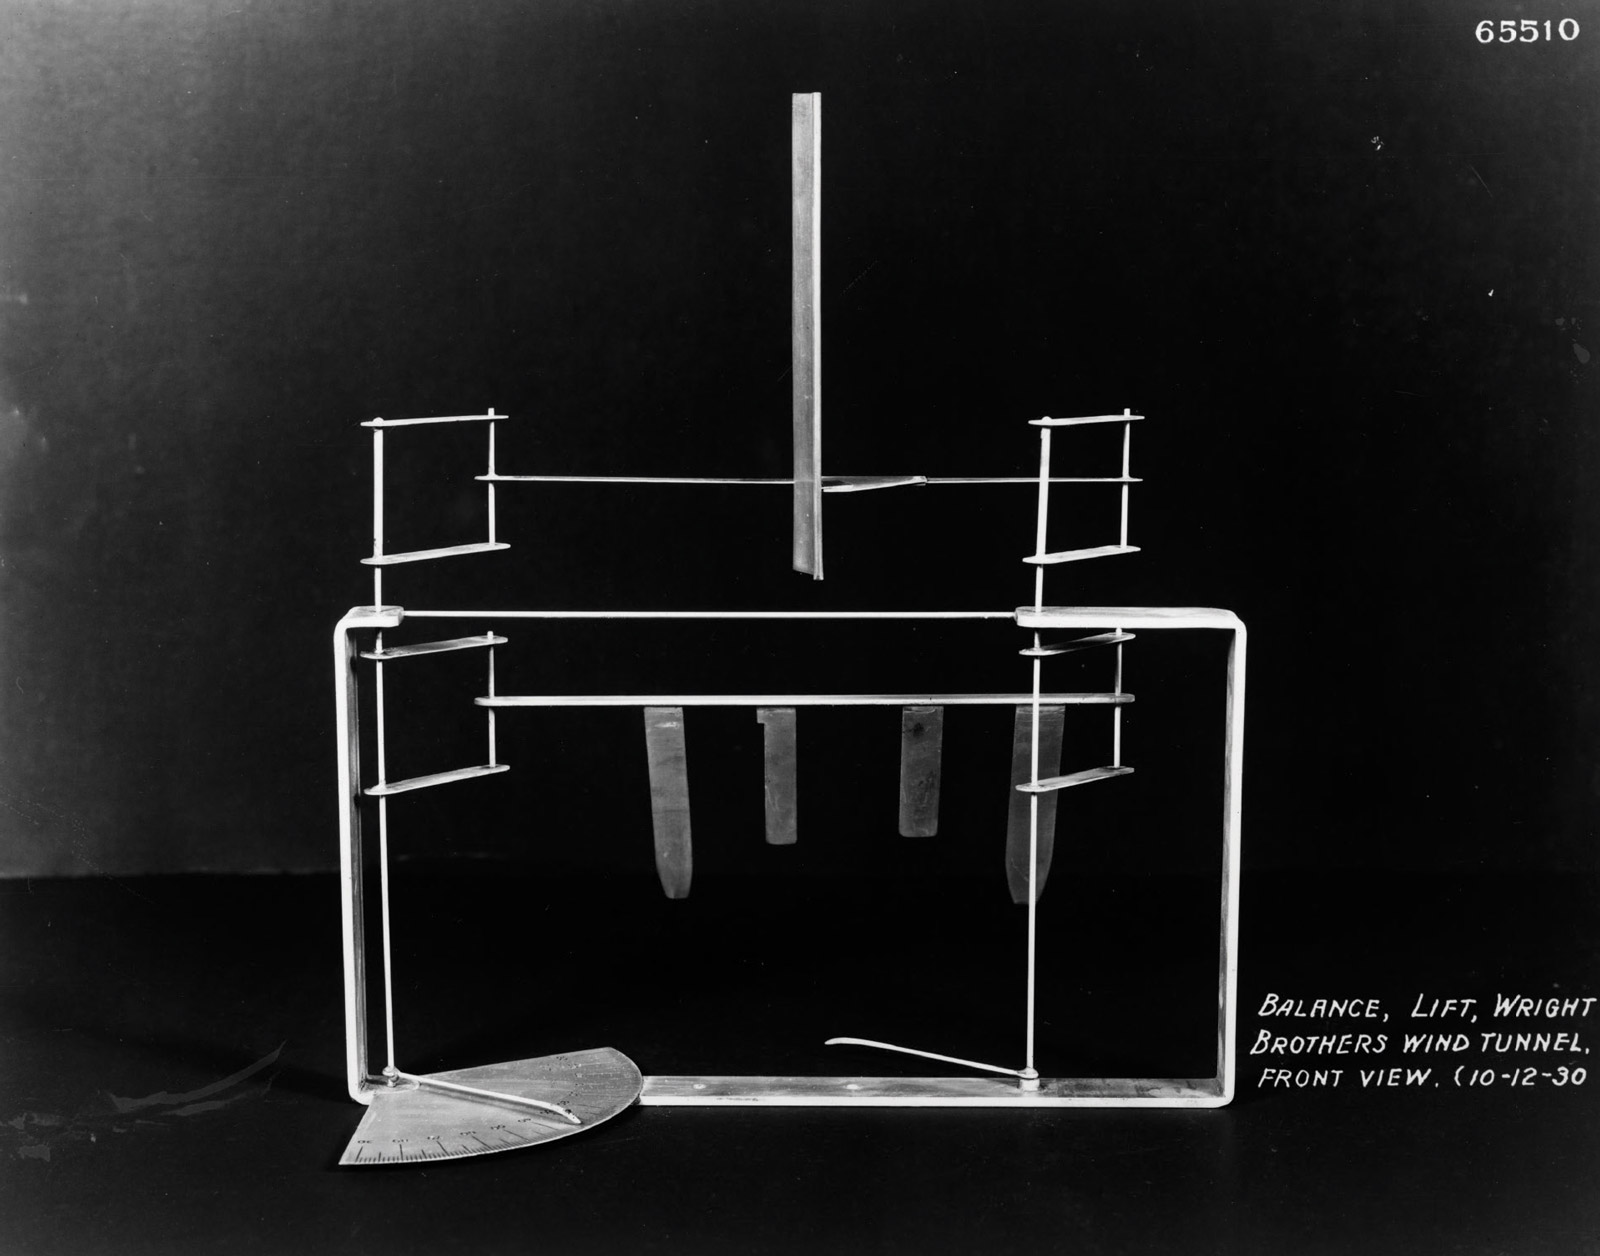 1930 reconstruction of the Wright brothers’ 1901 lift balance. The original
balance, made from bicycle spokes and hacksaw blades, enabled the Wrights
to measure aerodynamic lift on small models of their wing designs. The brothers
built a similar balance to measure drag. Interactive simulators of both lift and
drag balances are available at wright.nasa.gov/airplane/balance.html. Courtesy Special Collections and Archives, Wright State University.